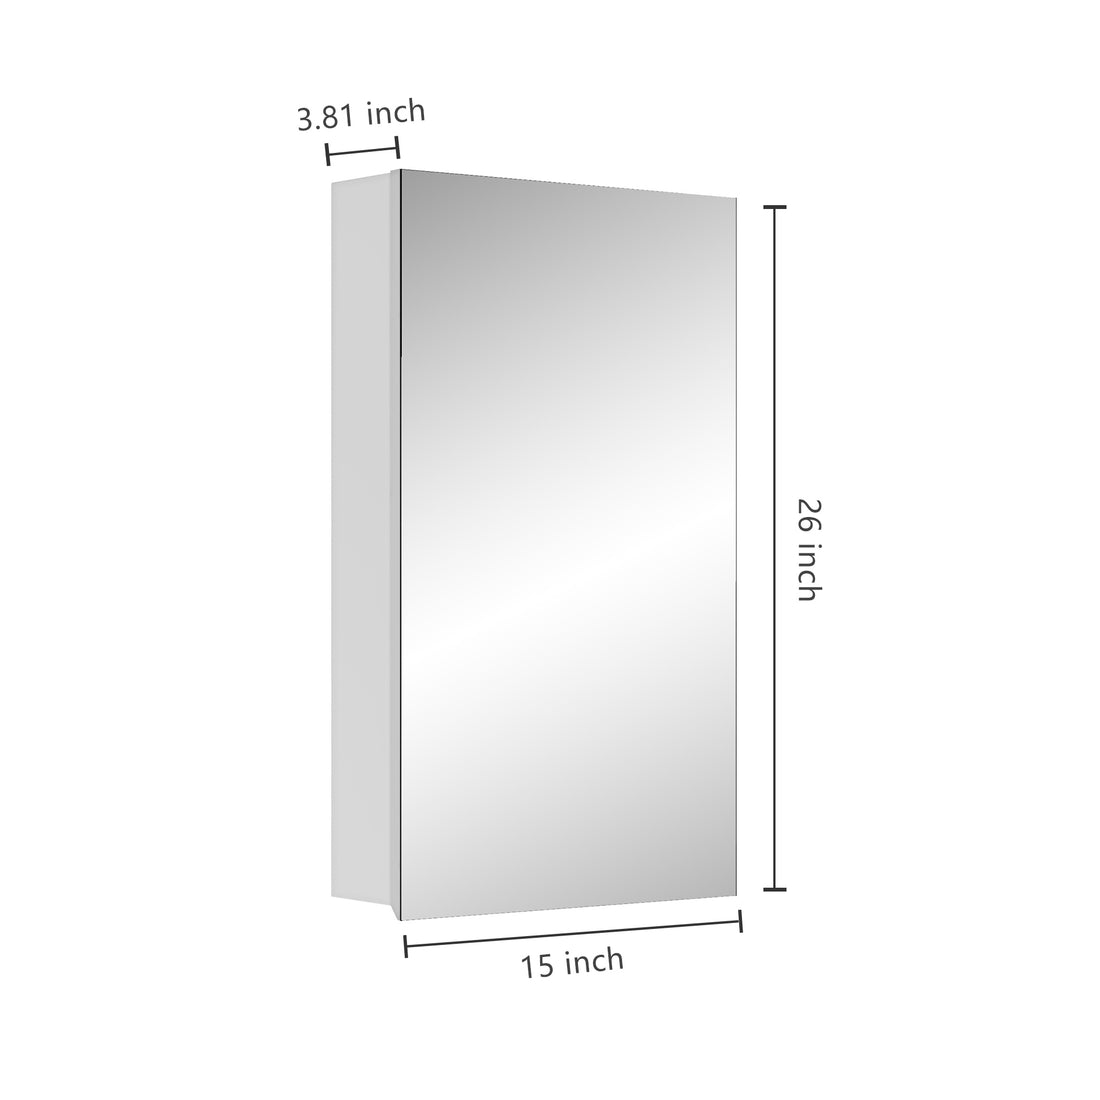 15" W x 26" H Single Door Bathroom Medicine Cabinet 3-white-1-up to 17 in-24 to 31 in-bathroom-less